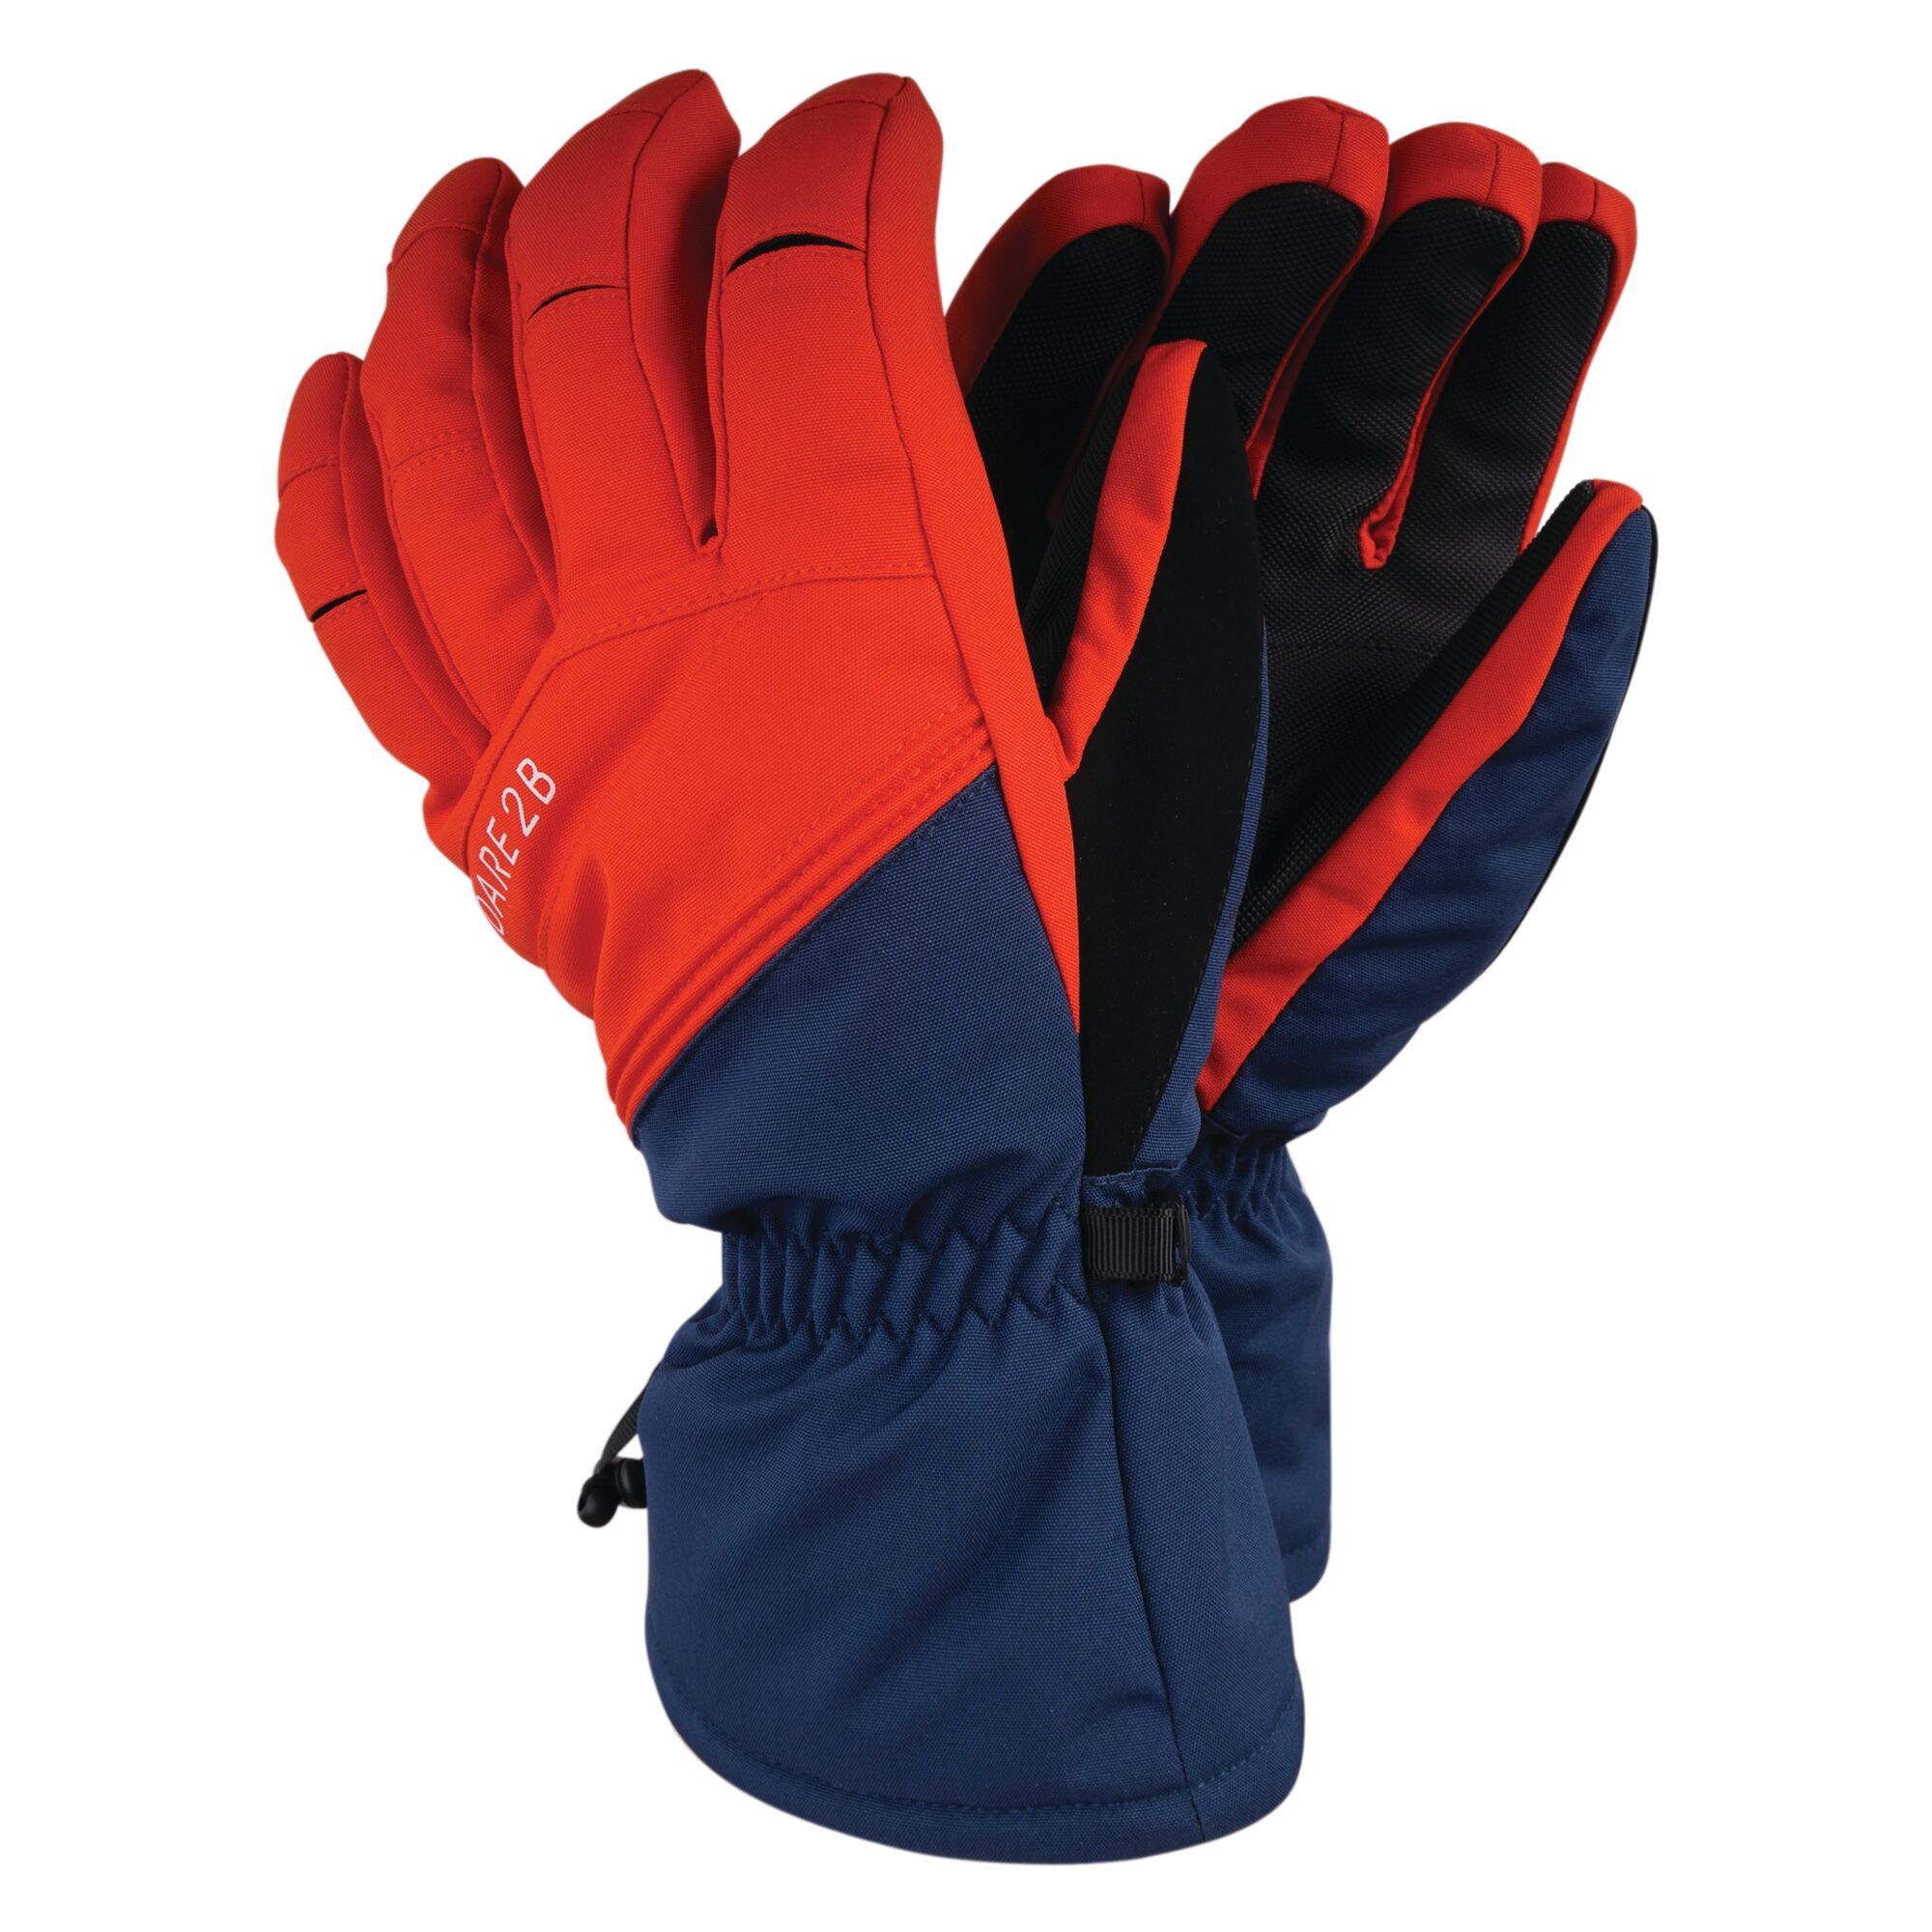 4 way stretch polyester fabric with waterproof and breathable Ared 10000 insert. Water repellent finish. Thinsulate lined. High loft polyester insulation. Warm scrim lining. Synthetic nubuck thumb. Textured gripped palm & thumb. Articulated finger design. Elasticated wrist. Longer length gauntlet cuff with shockcord adjustment. Secure clip attachment.